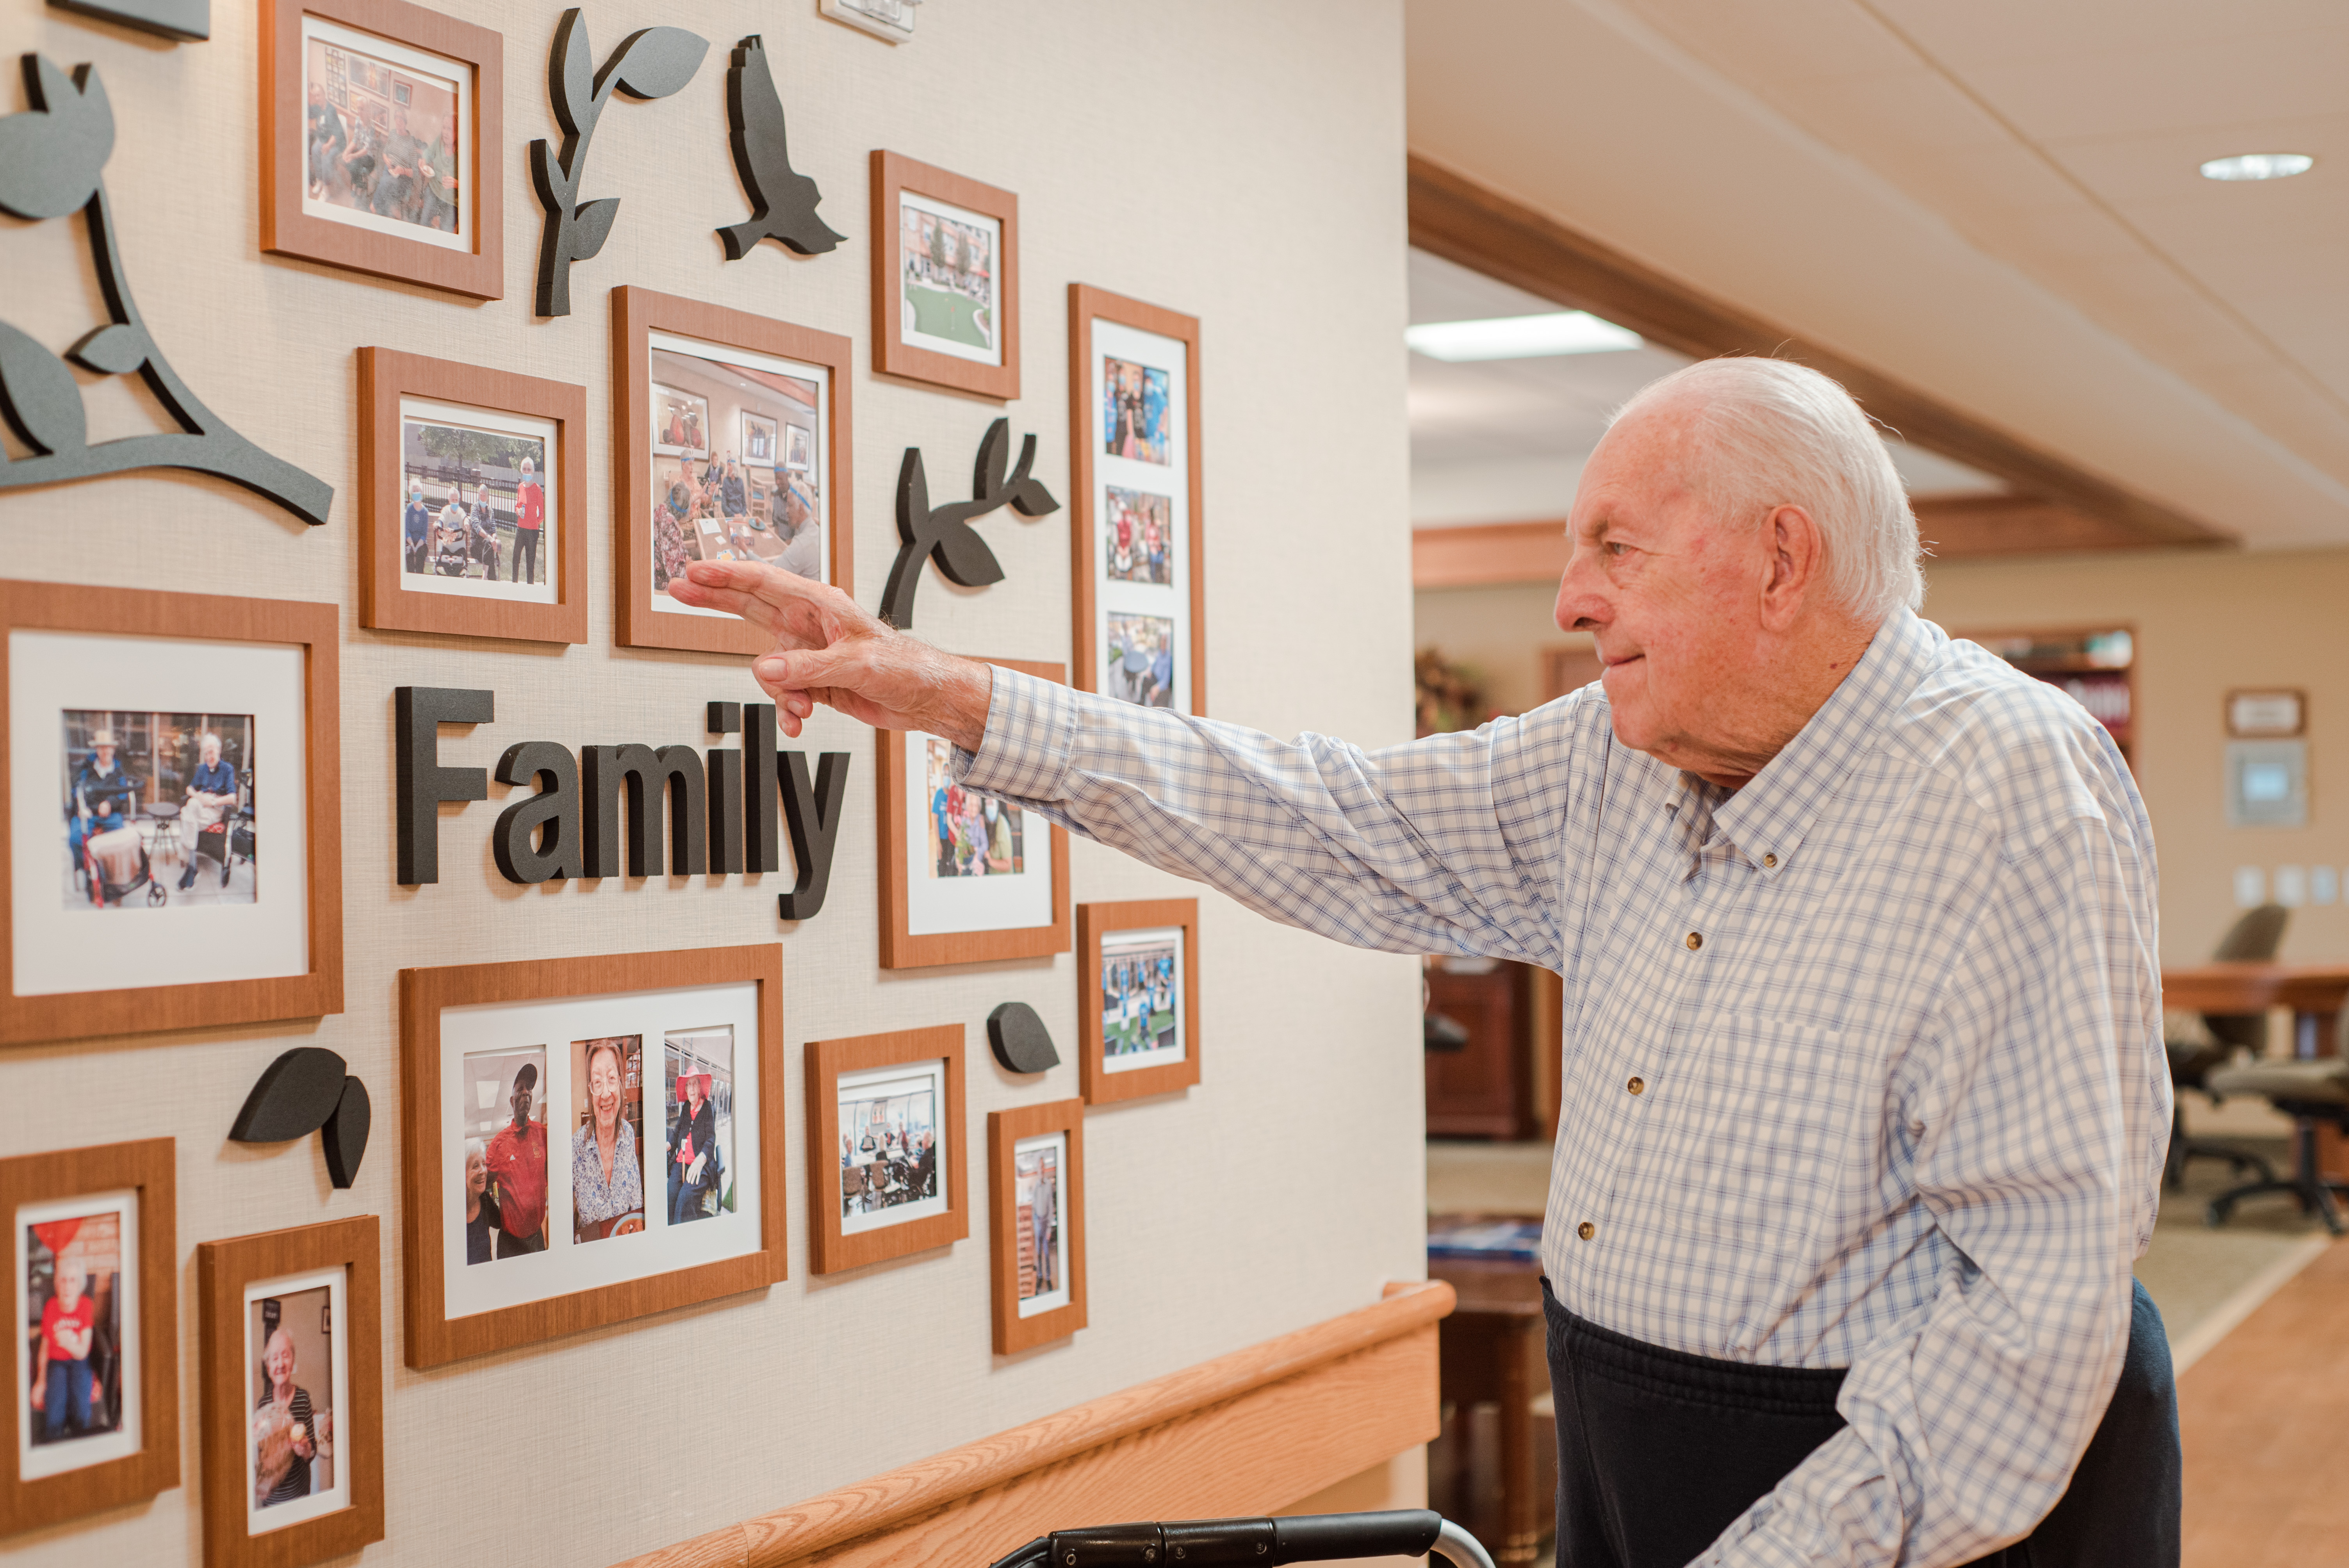 senior man looking at the wall of portraits with the word Family in the middle